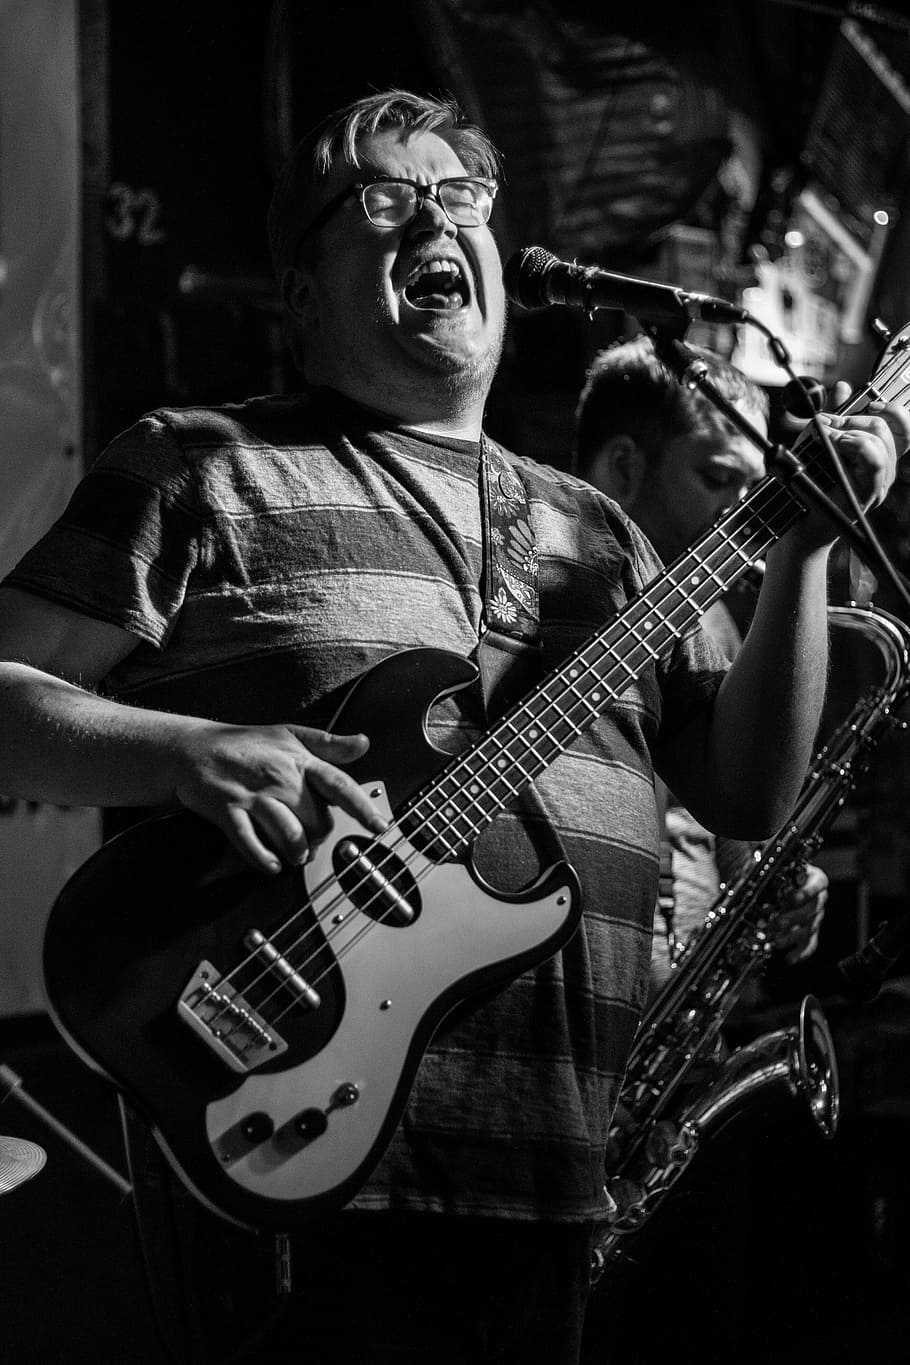 grayscale photography, man, playing, guitar, singing, musician, bass, music, black and white, scream